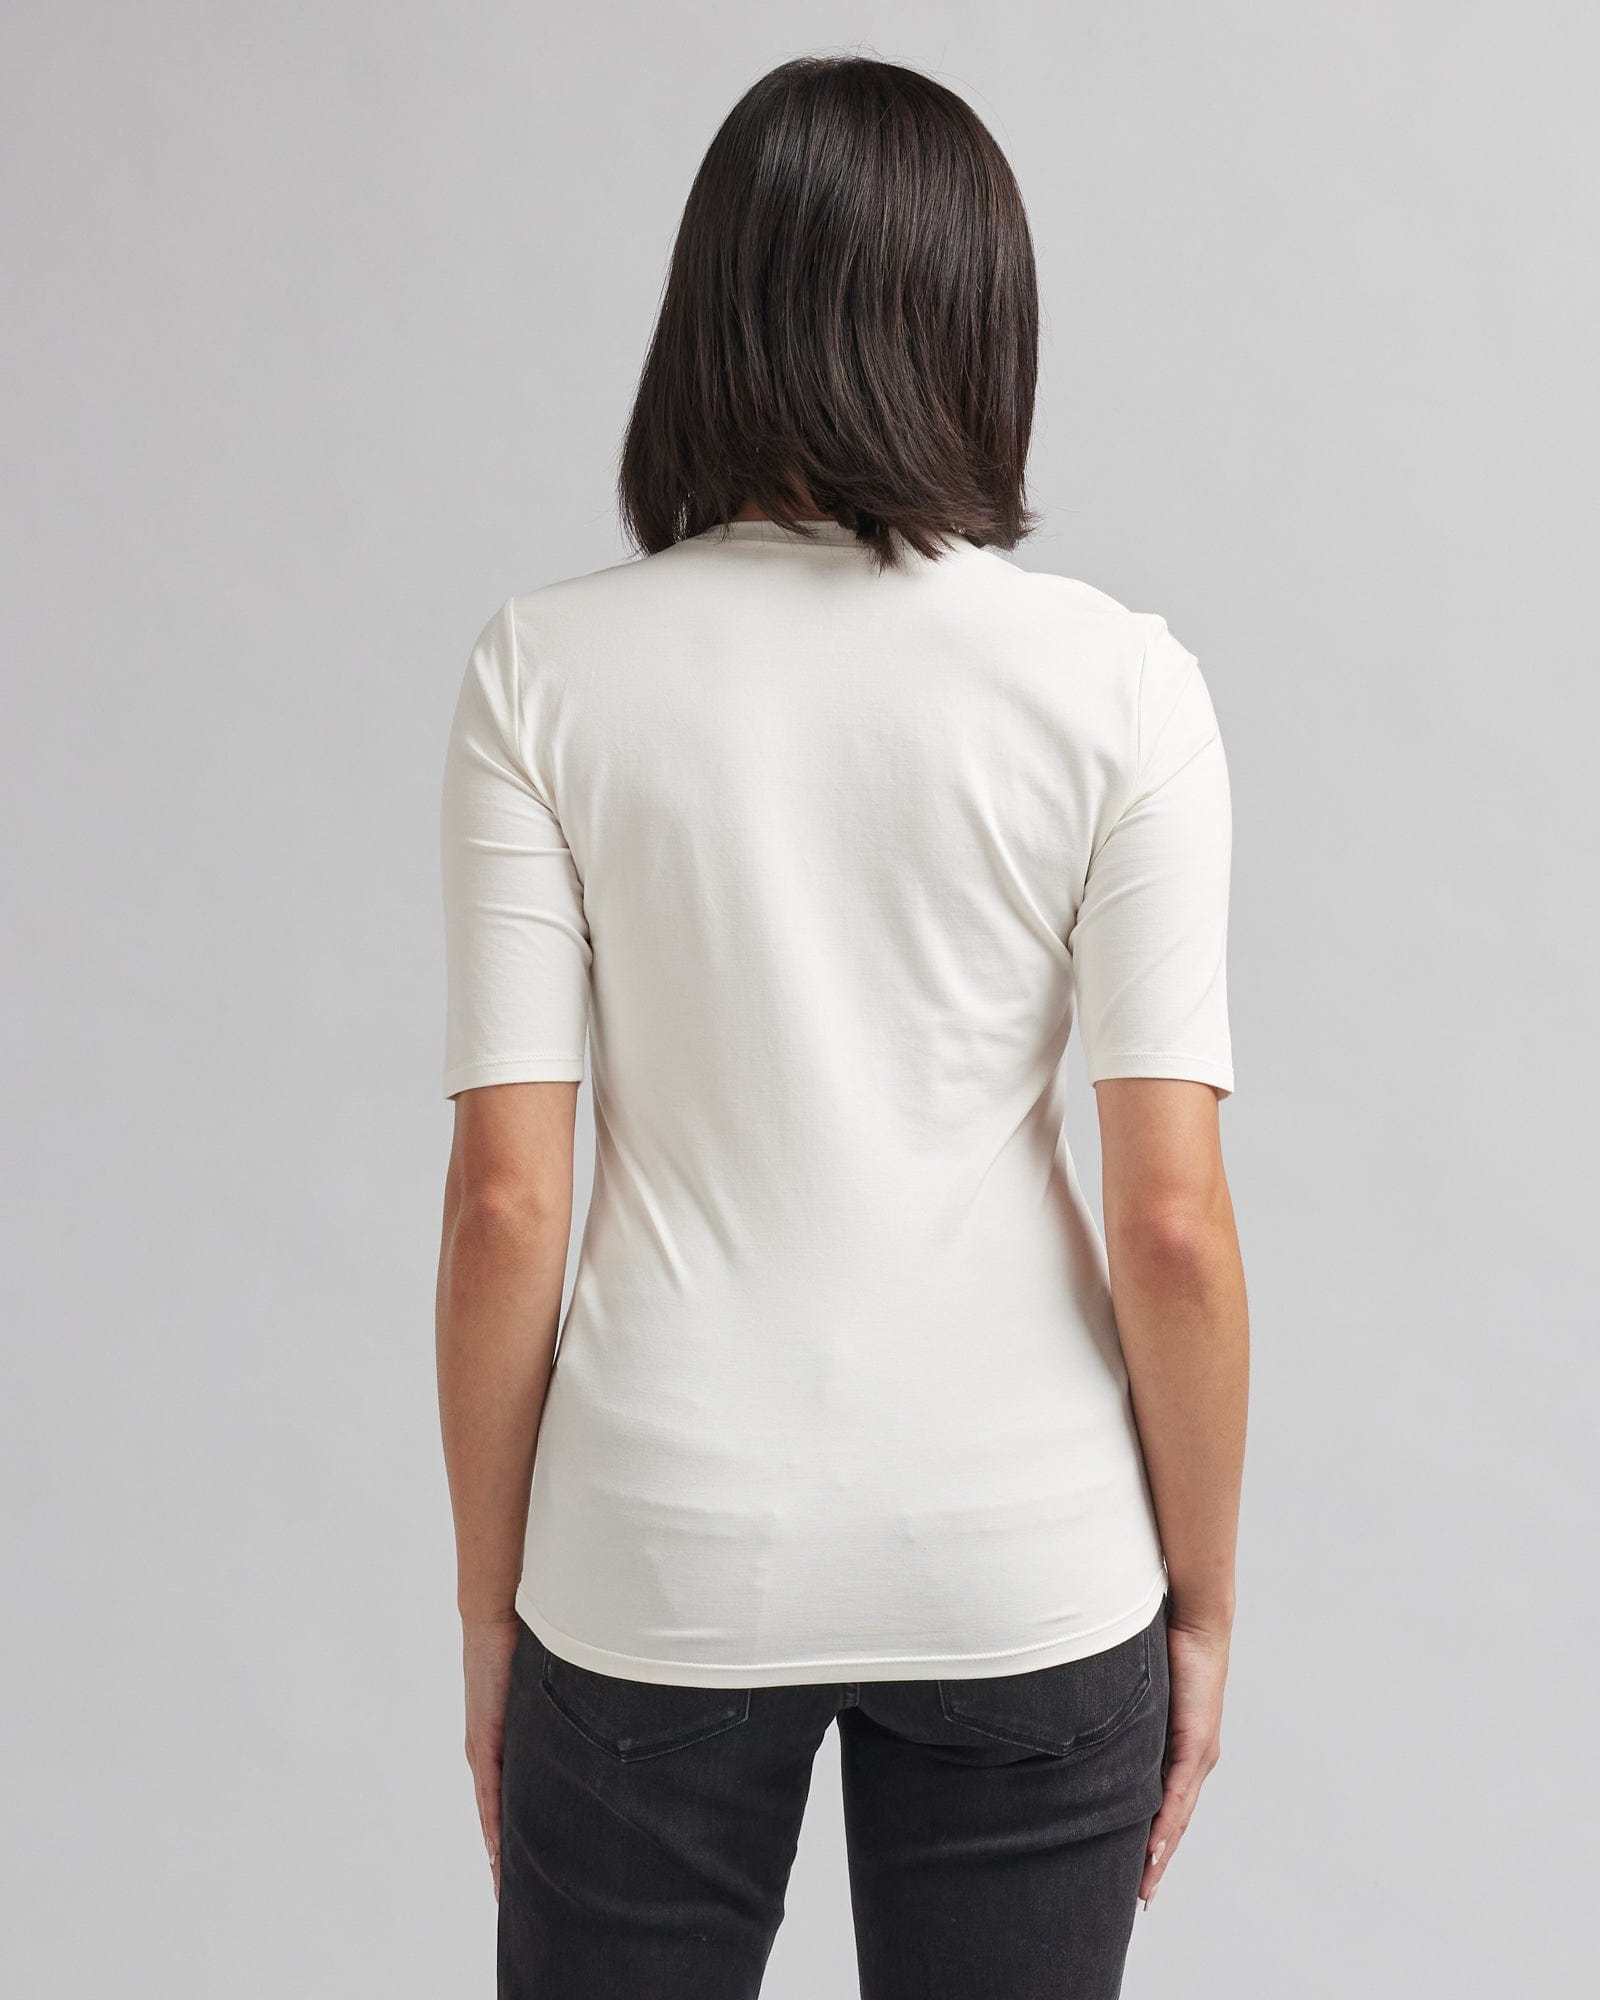 Woman in a half sleeved, basic t-shirt